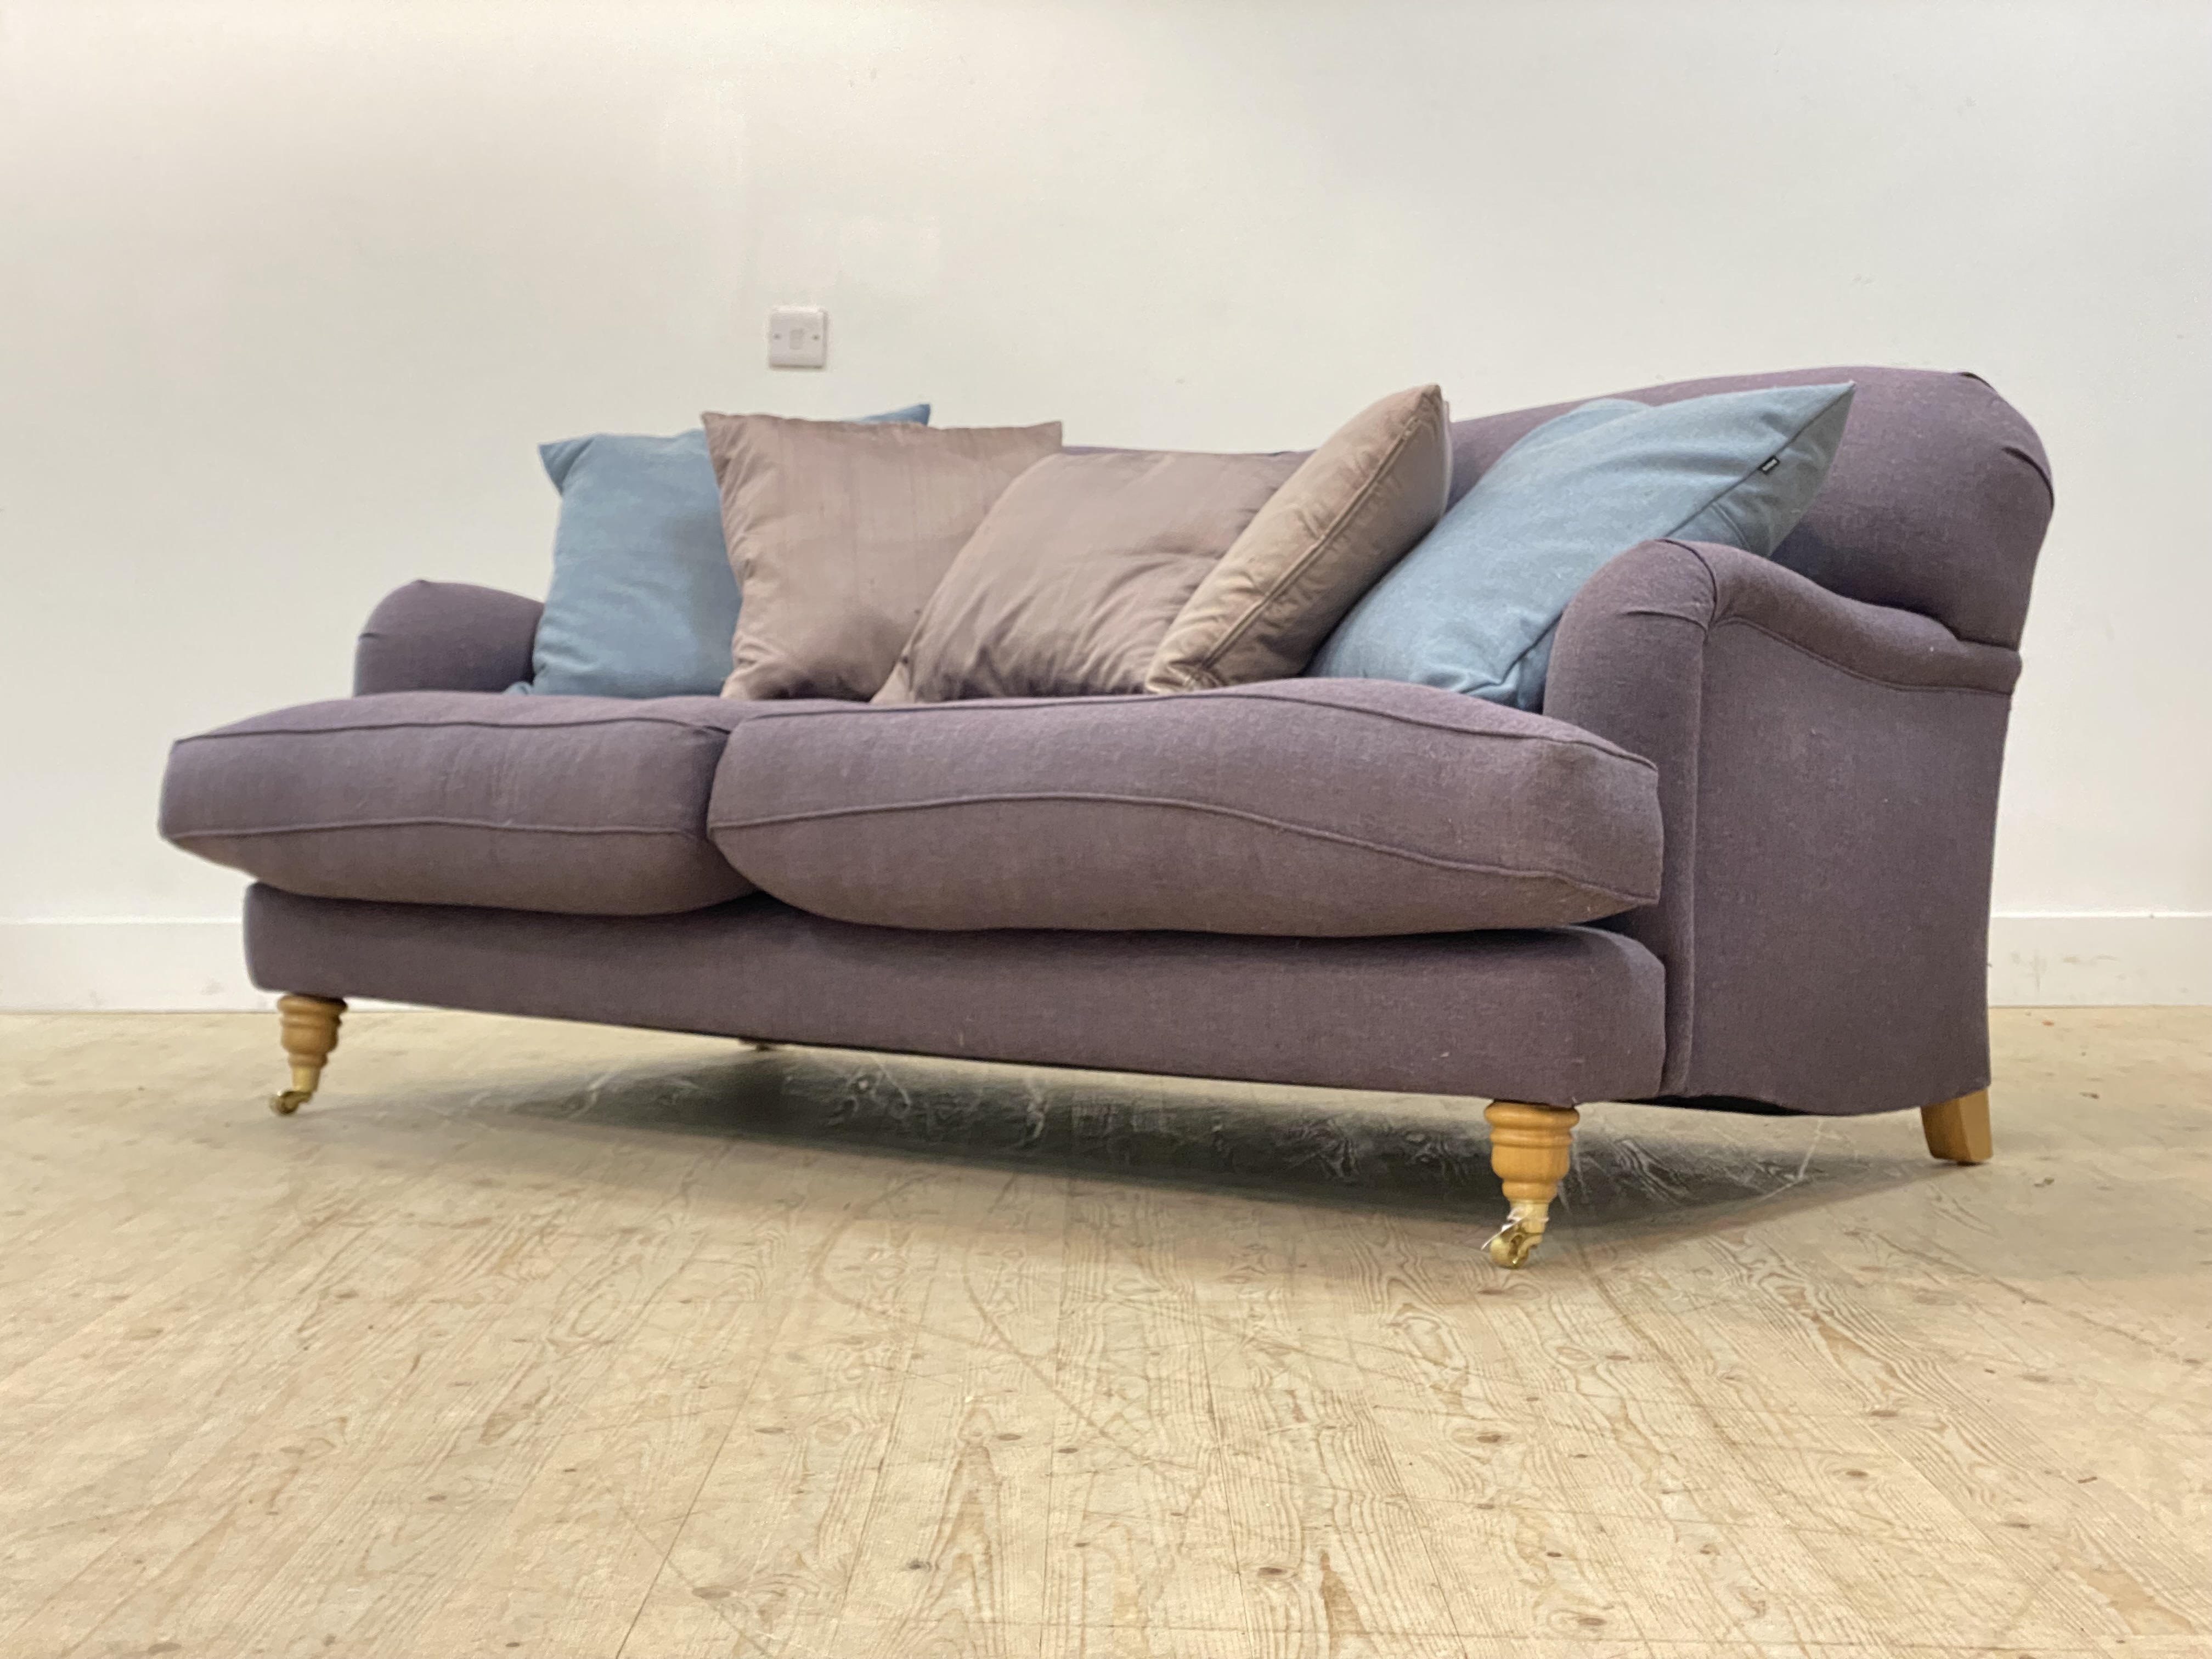 Charlotte James for Anta, a traditional 'Howard style' two seat sofa, the frame and deep squab